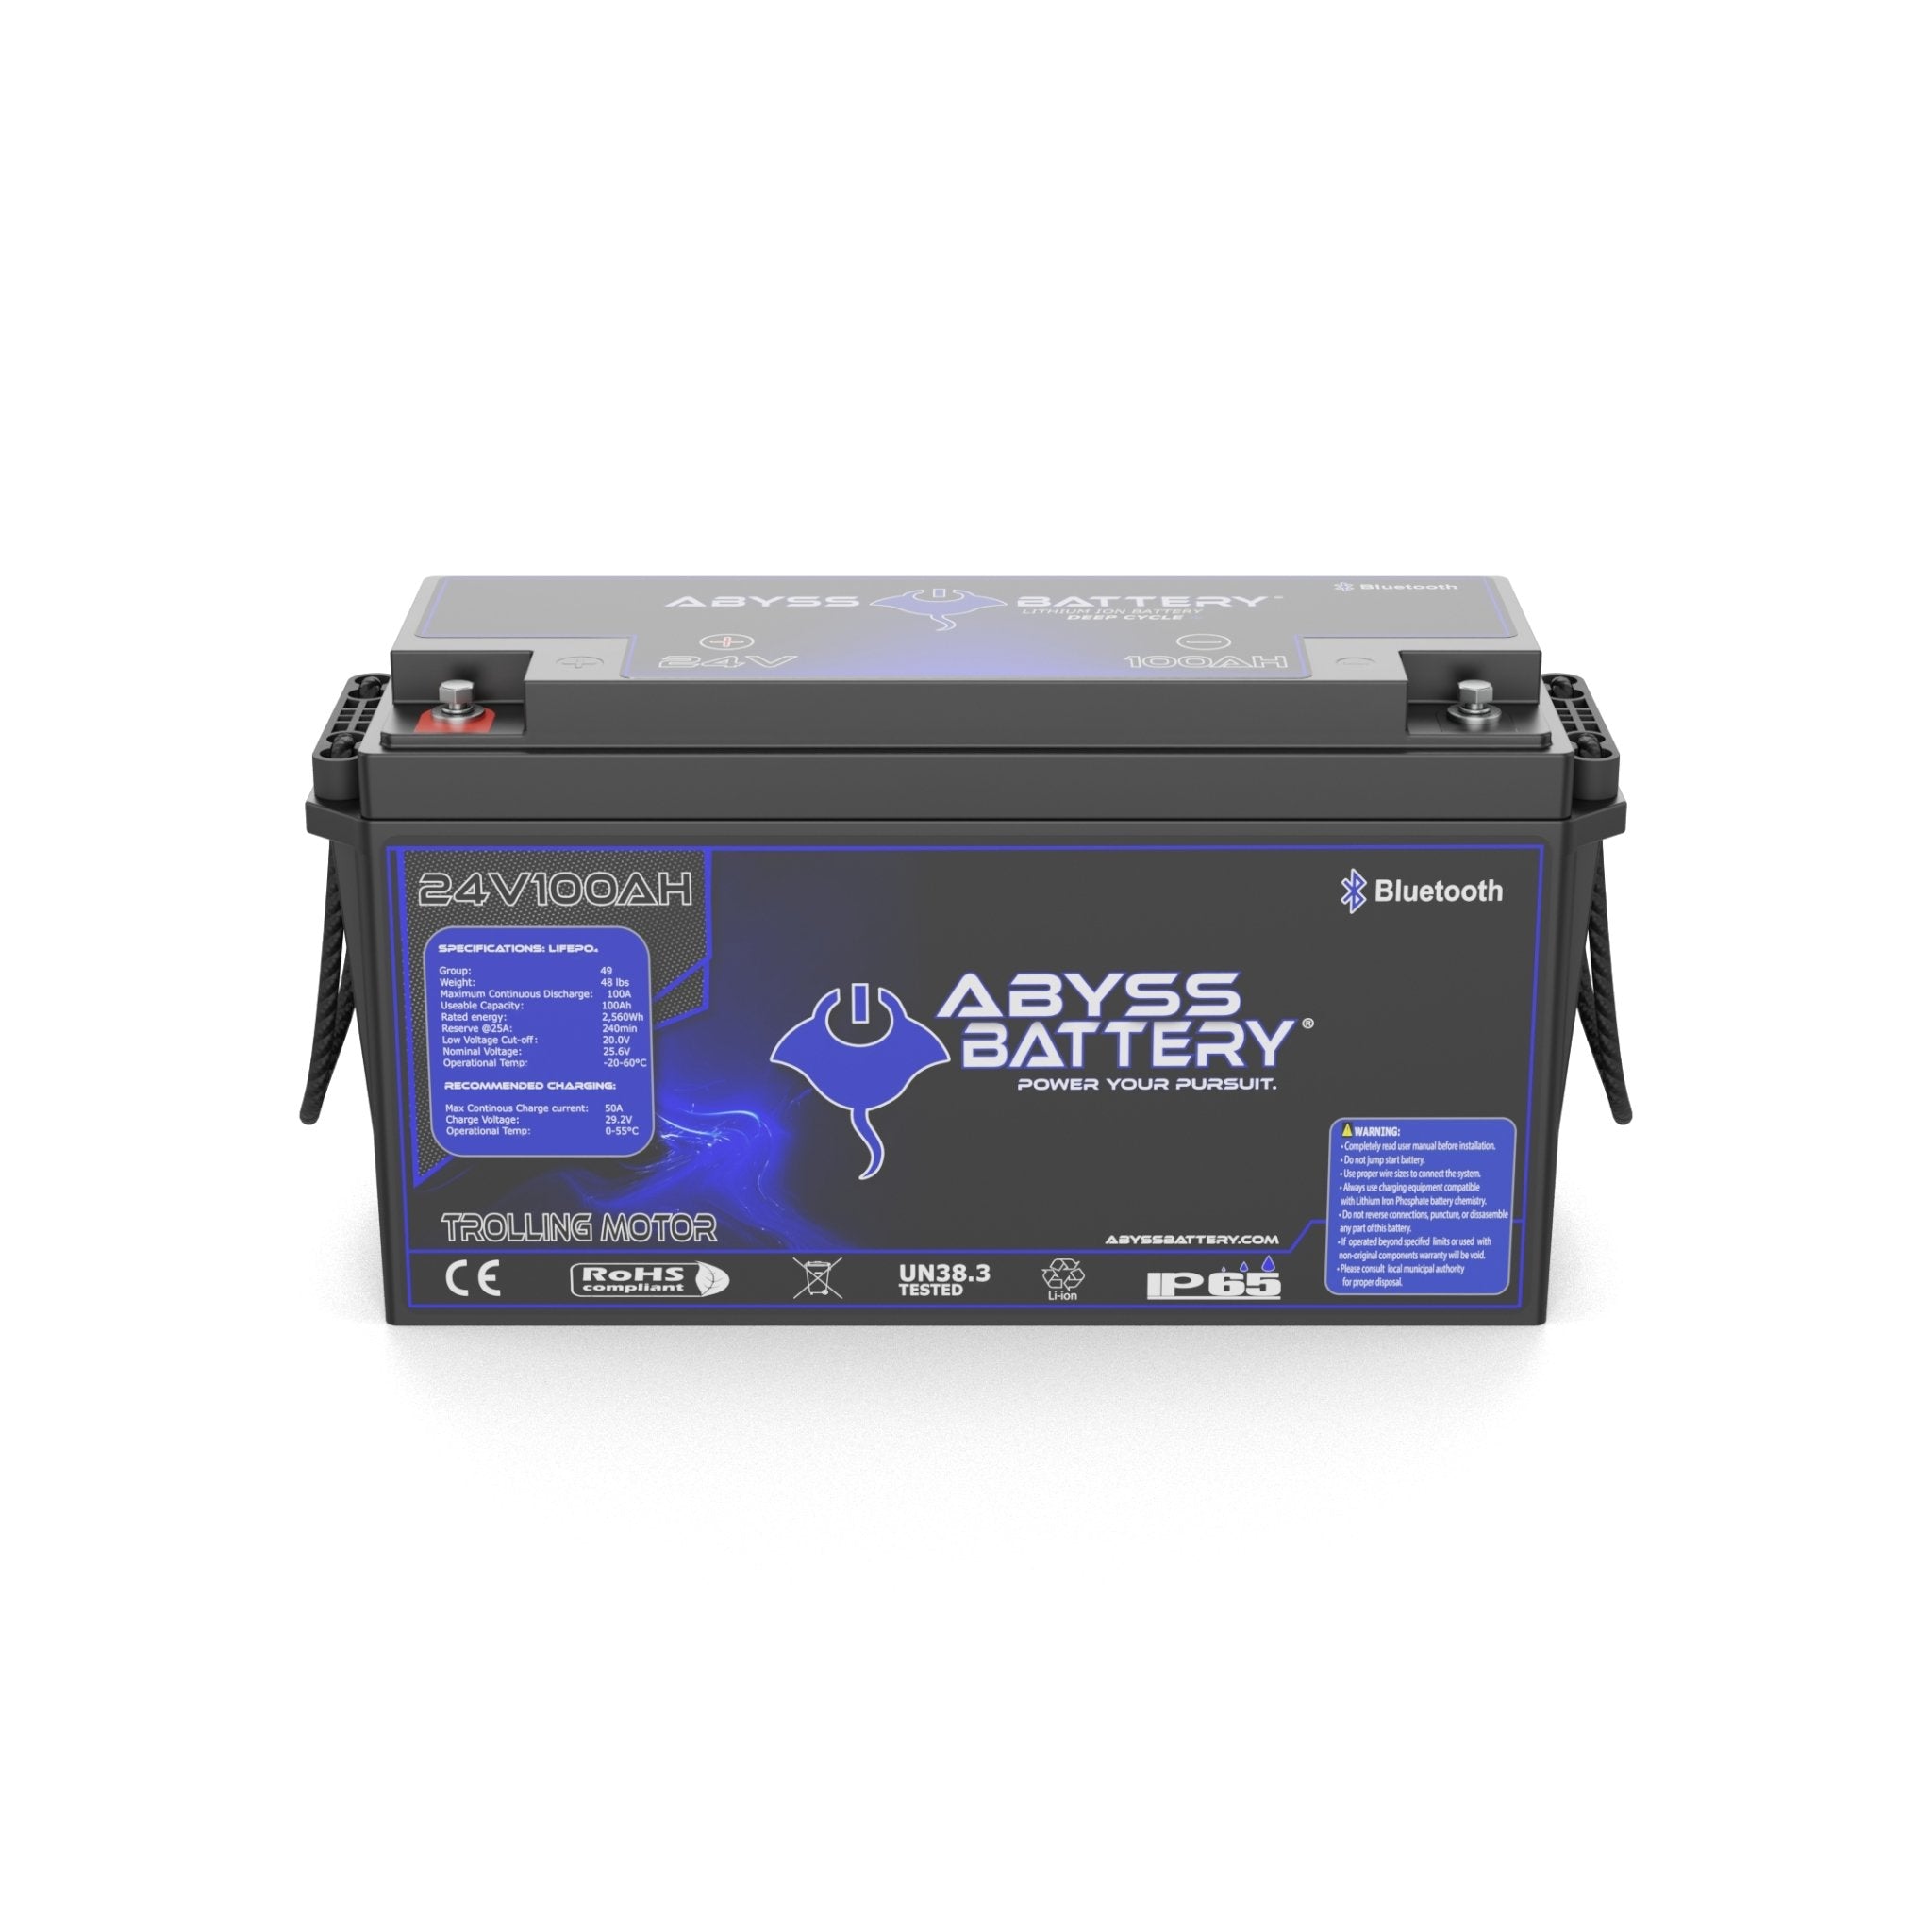 Abyss Battery® - 24V 100Ah Group 49 Lithium Trolling Motor Battery